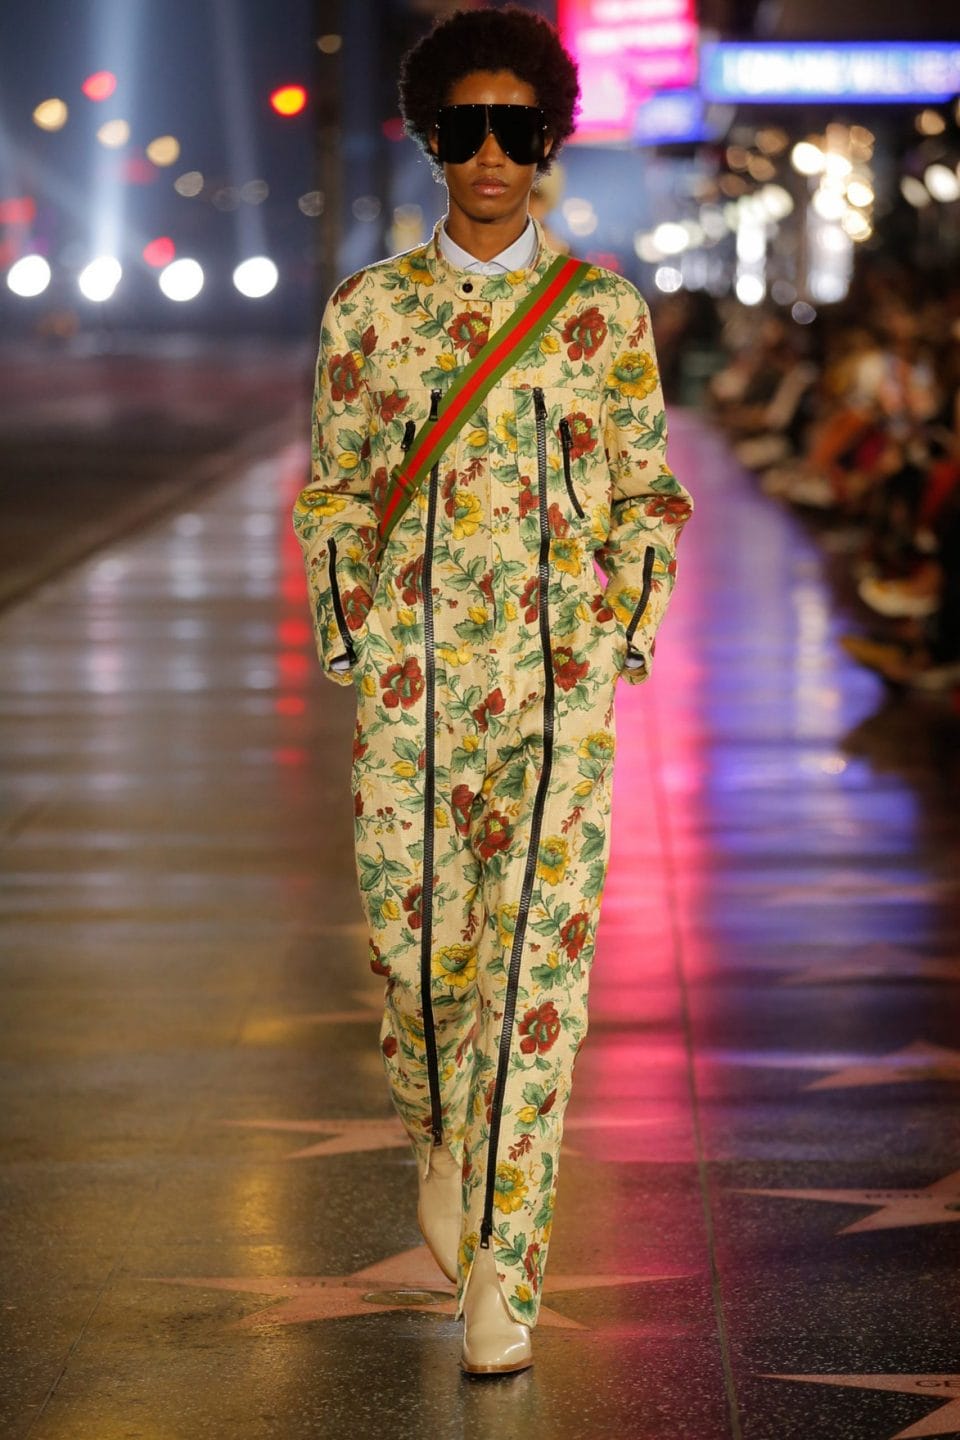 The Gucci Love Parade Show Was a Directional Vision of Happiness